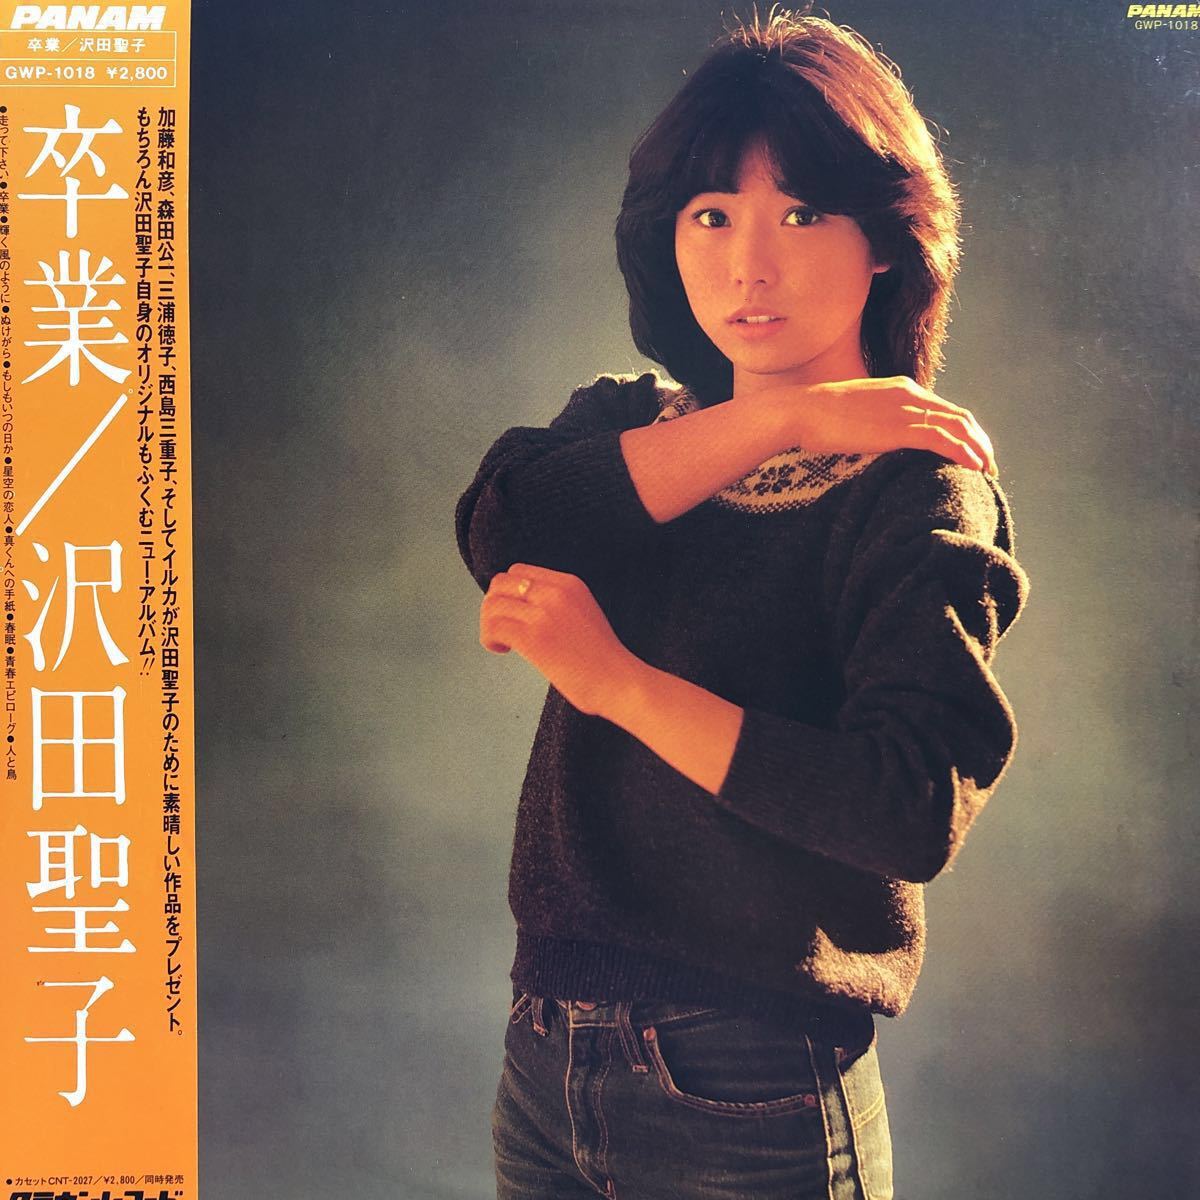 d with belt LP Sawada Shoko . industry record 5 point and more successful bid free shipping 